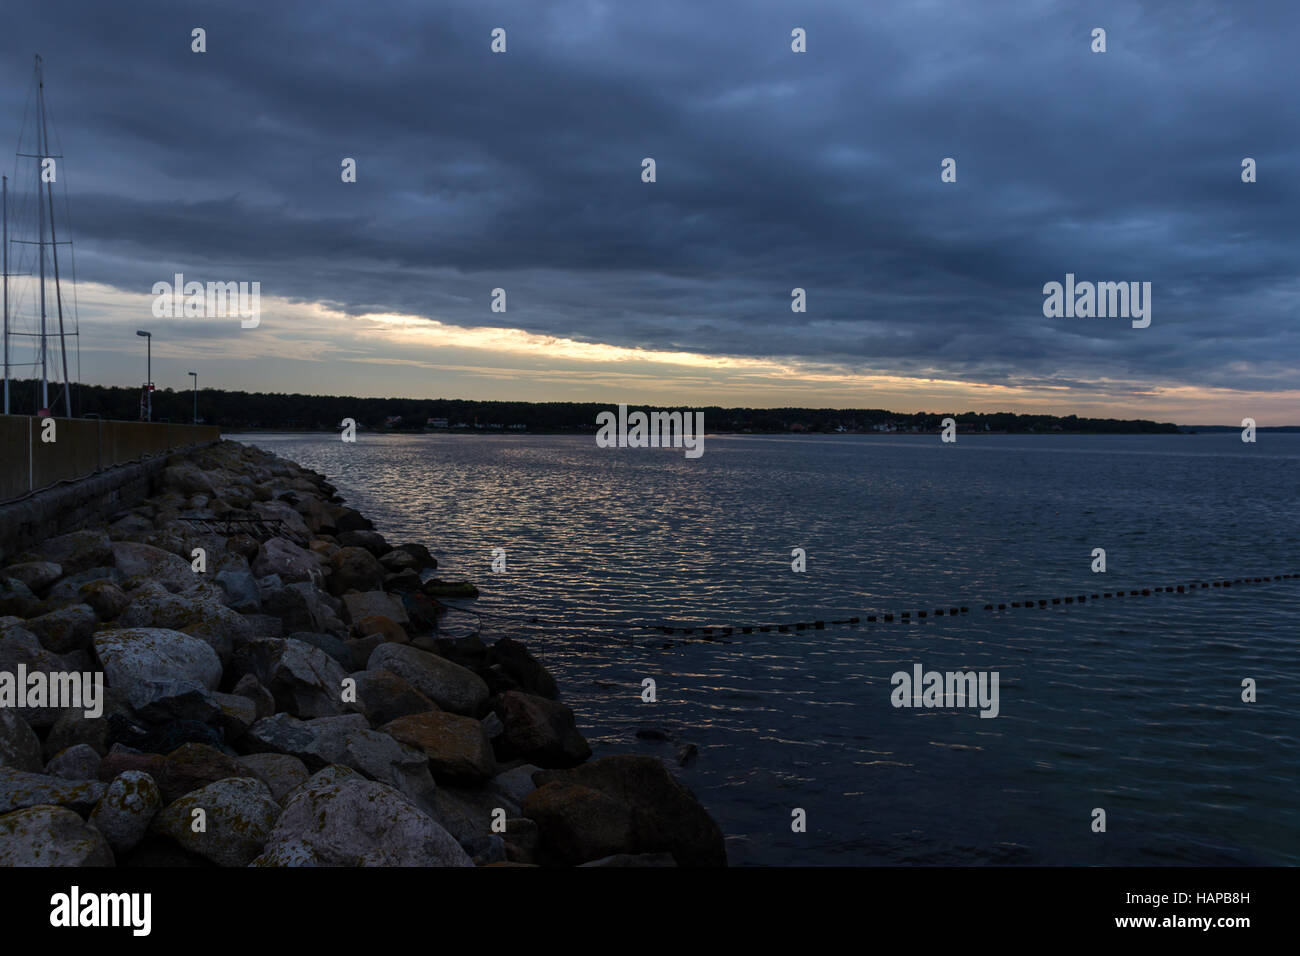 A harbor and fishing net at twilight Stock Photo